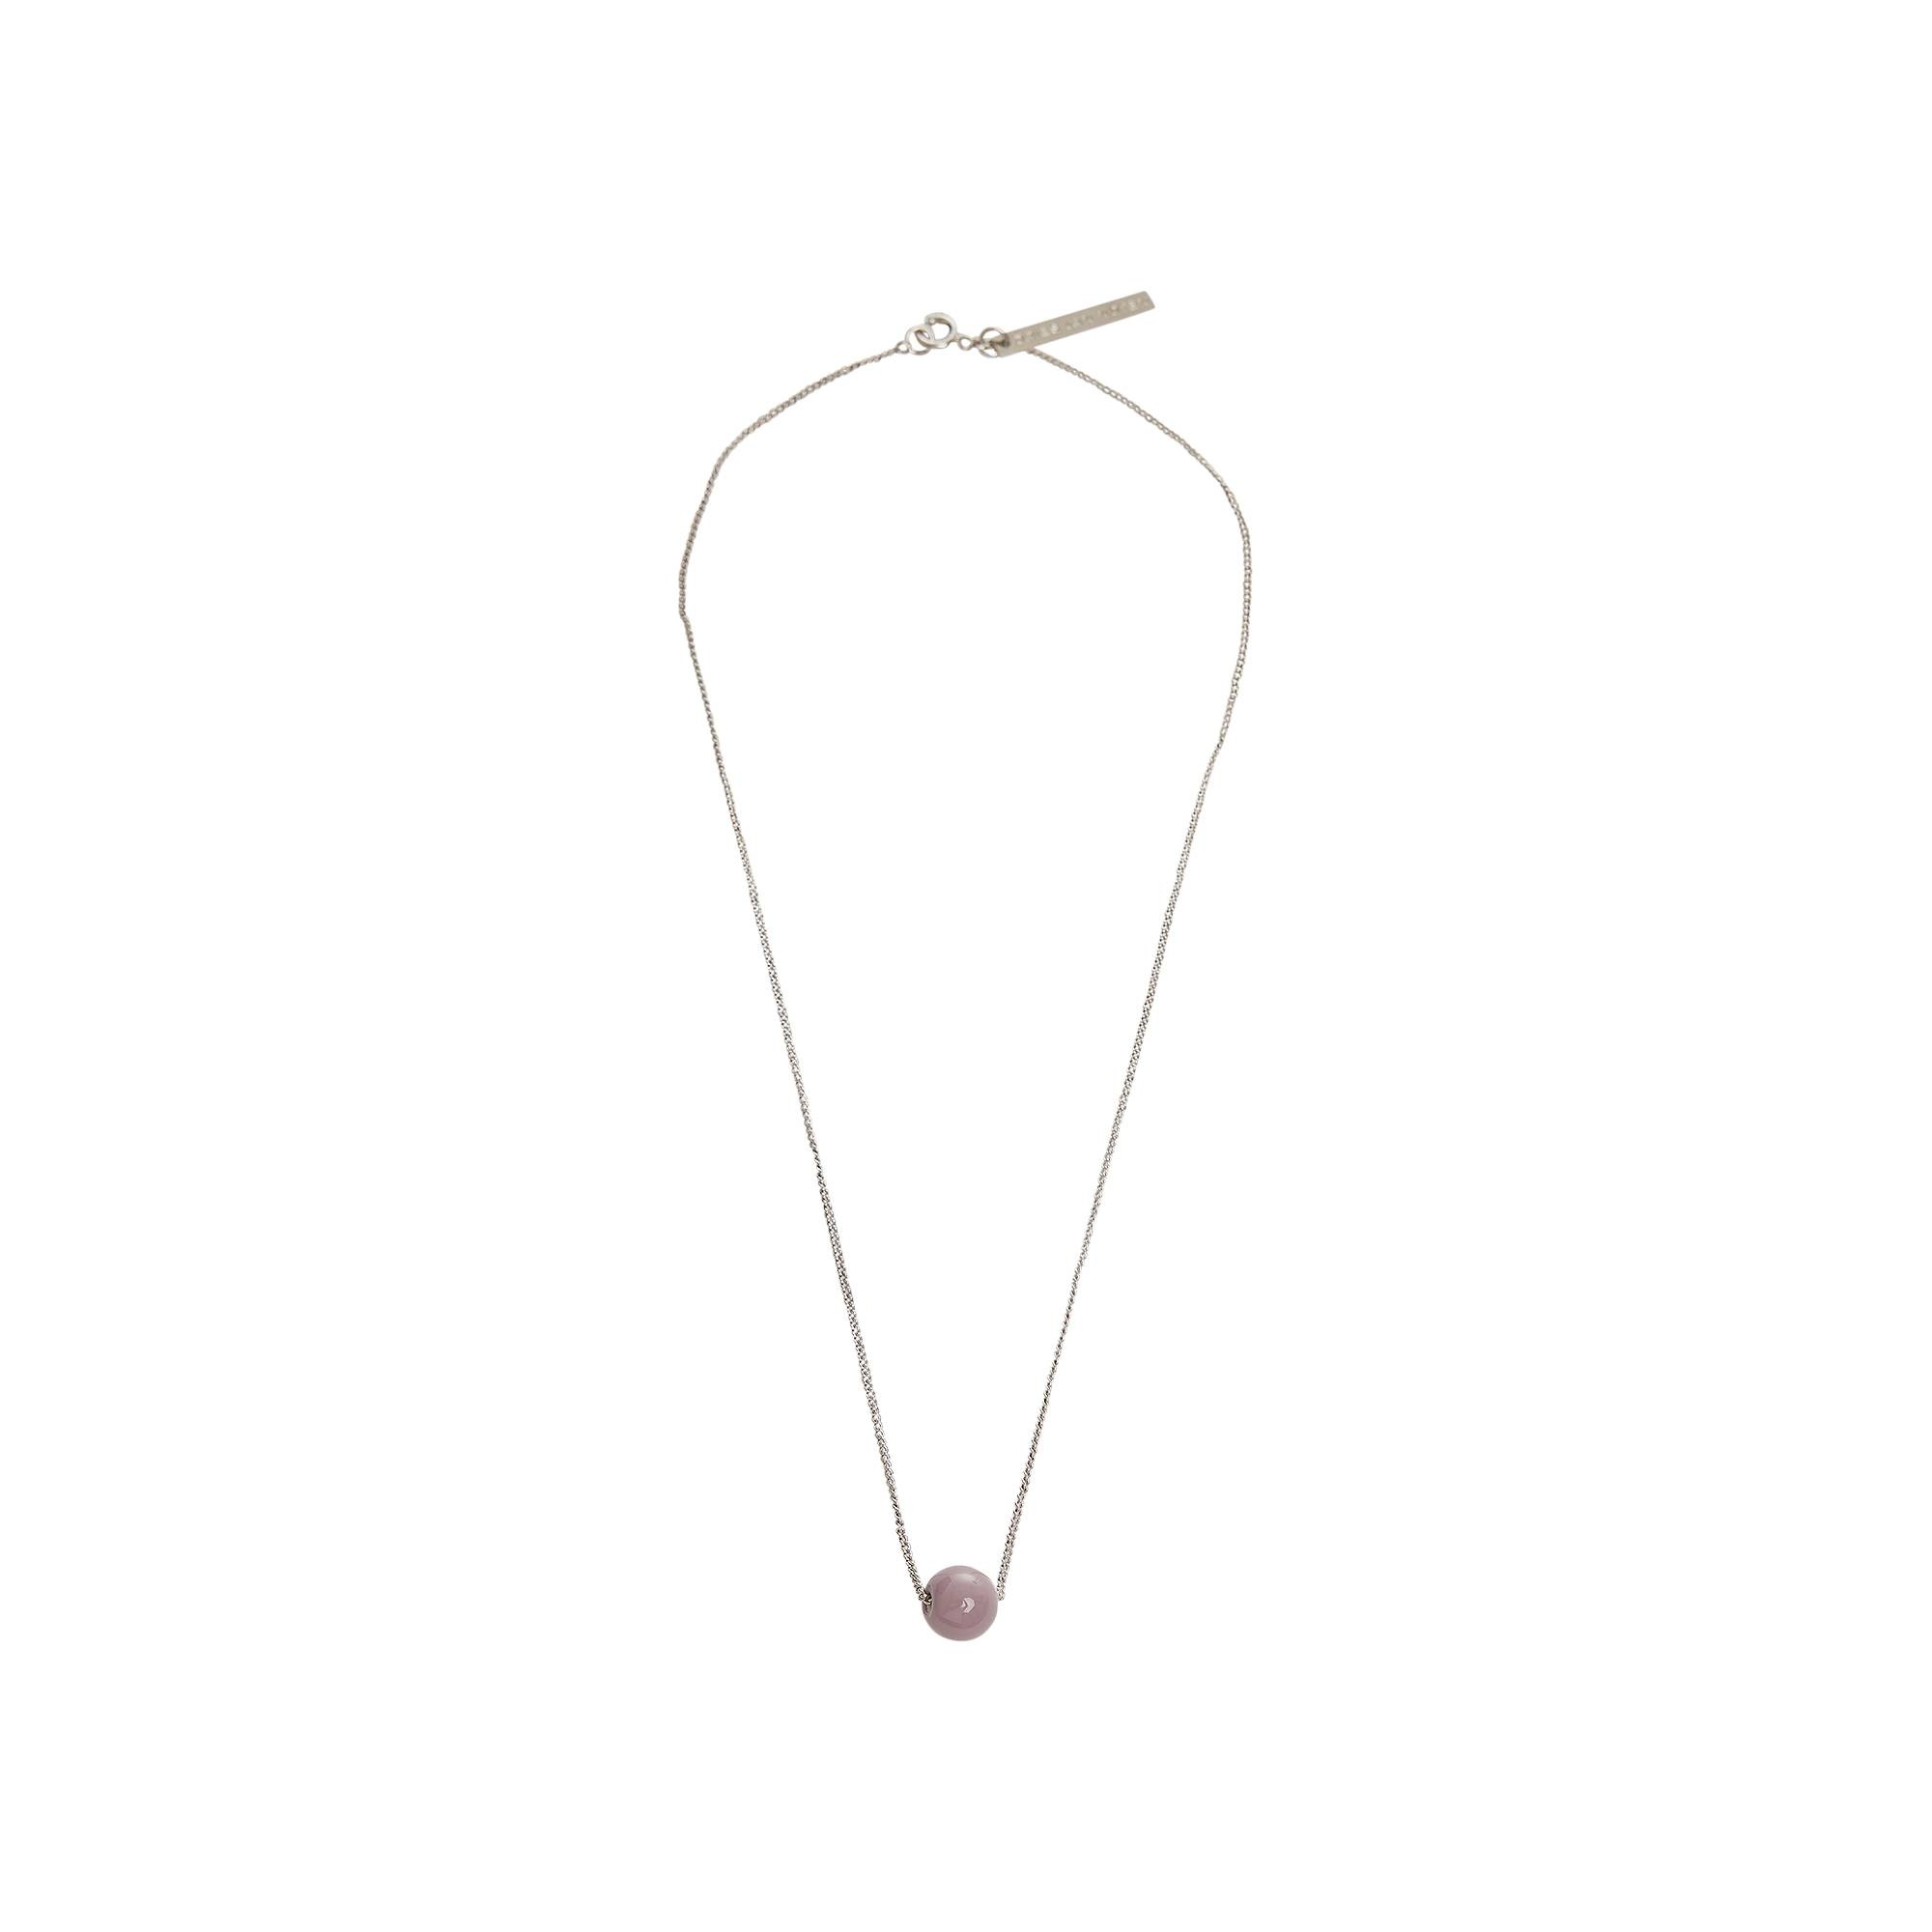 Dries Van Noten Ball Jewelry Necklace 'Lilac' - 1